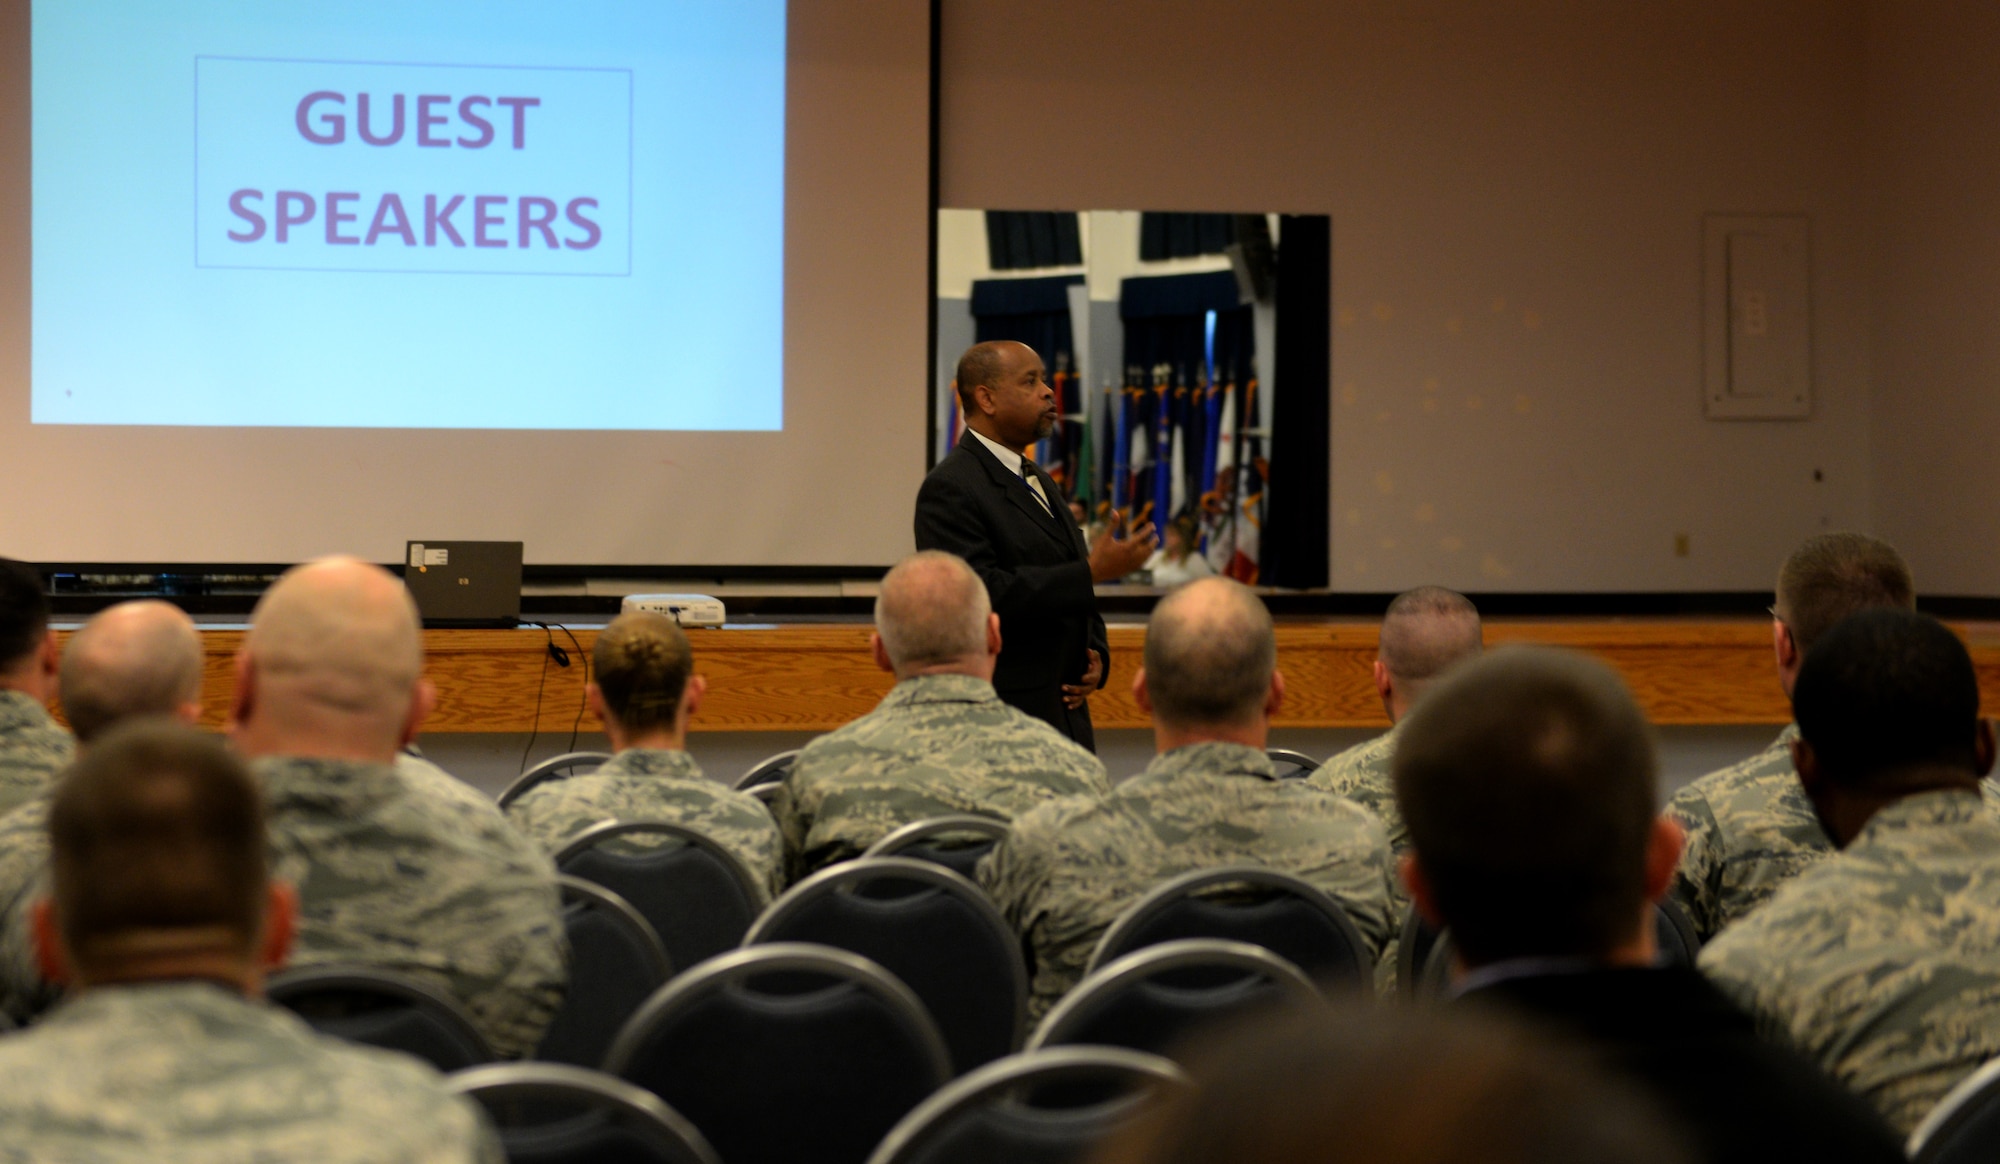 Clarence Benjamin Jr., Northern California director of the Combined Federal Campaign, speaks at the CFC kickoff event Nov. 7, 2016, at Beale Air Force Base, California. Since the first campaign in 1964, Federal employees have donated more than $8 billion for the charities and causes that are near and dear to them. (U.S. Air Force photo/Staff Sgt. Jeffrey Schultze)